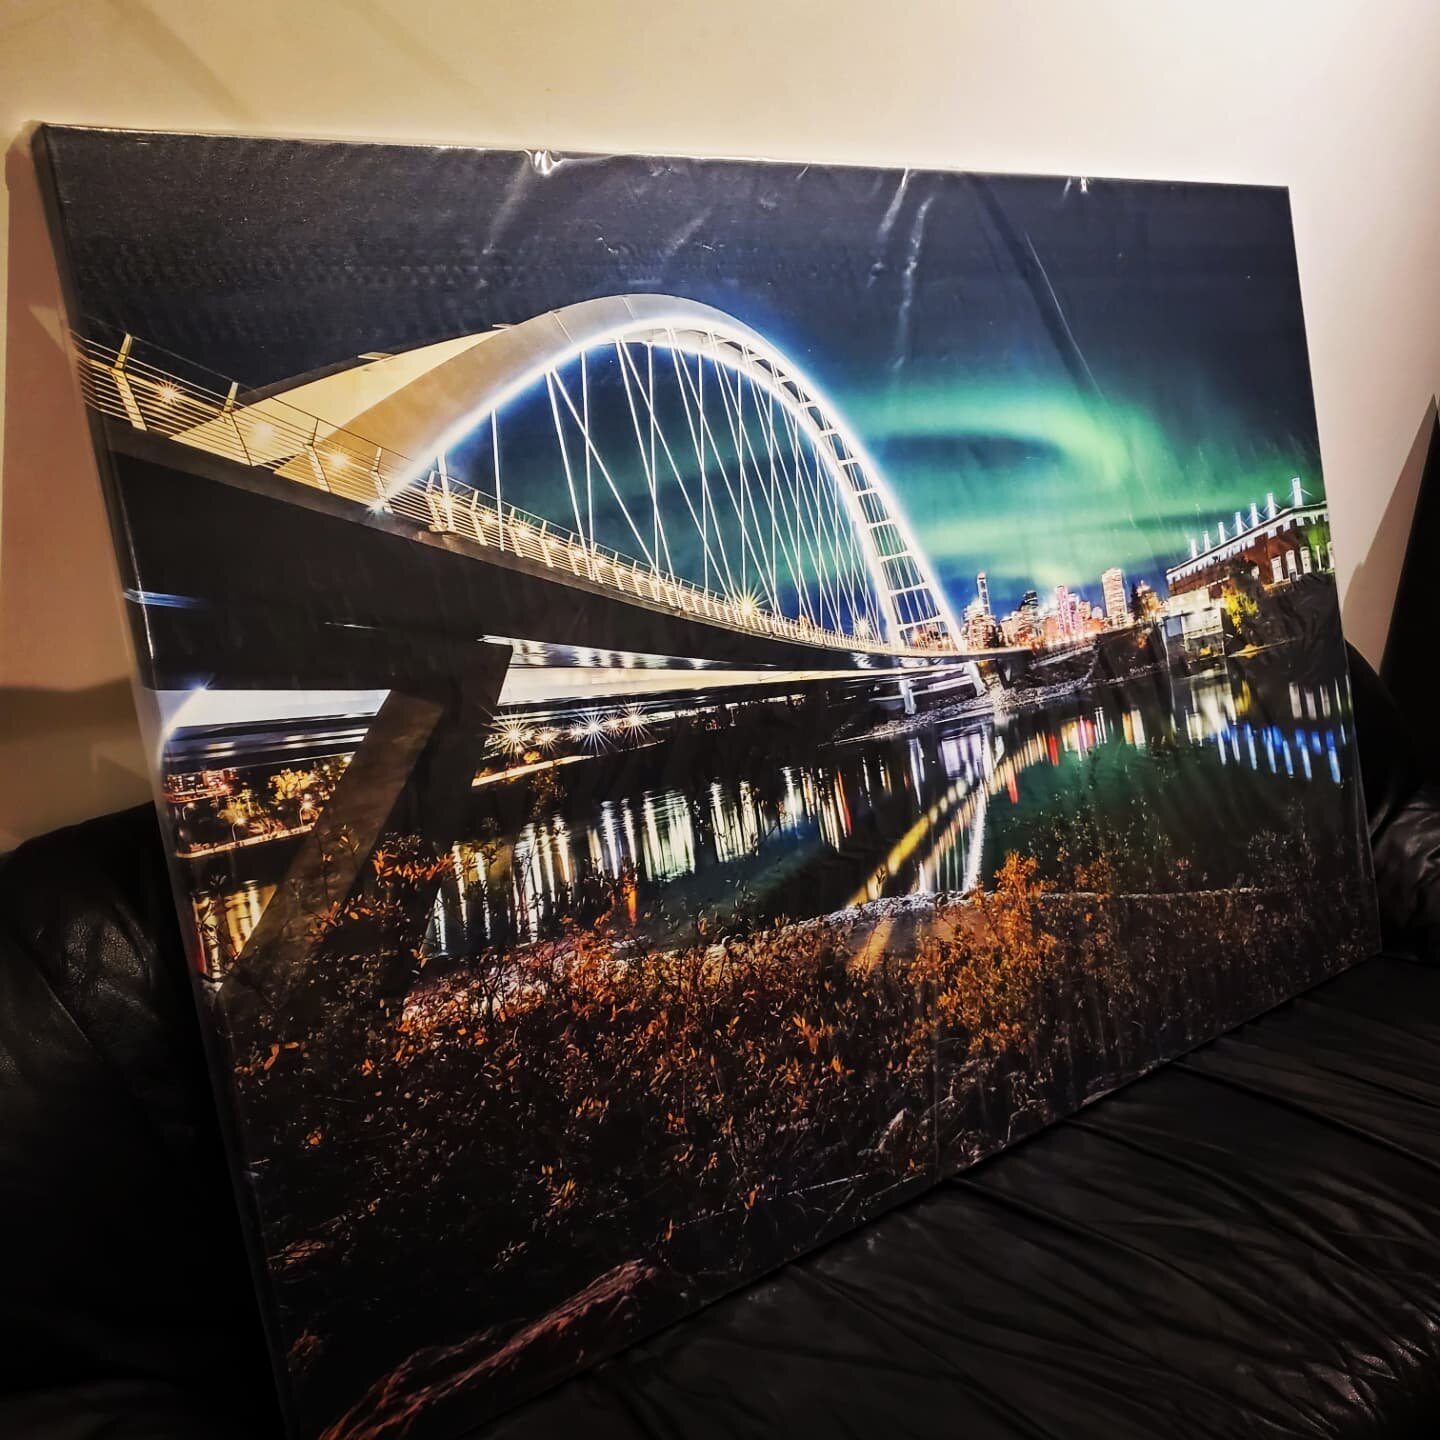 Someone's going home with this gorgeous and massive 5ft wide print for Christmas!! Rusty for scale. That person could also be you or a loved one. DM if you'd like a print! 
.
.
.
.
.
#yeg #yegphotography #yegphotographer #yegdt #walterdalebridge #bri